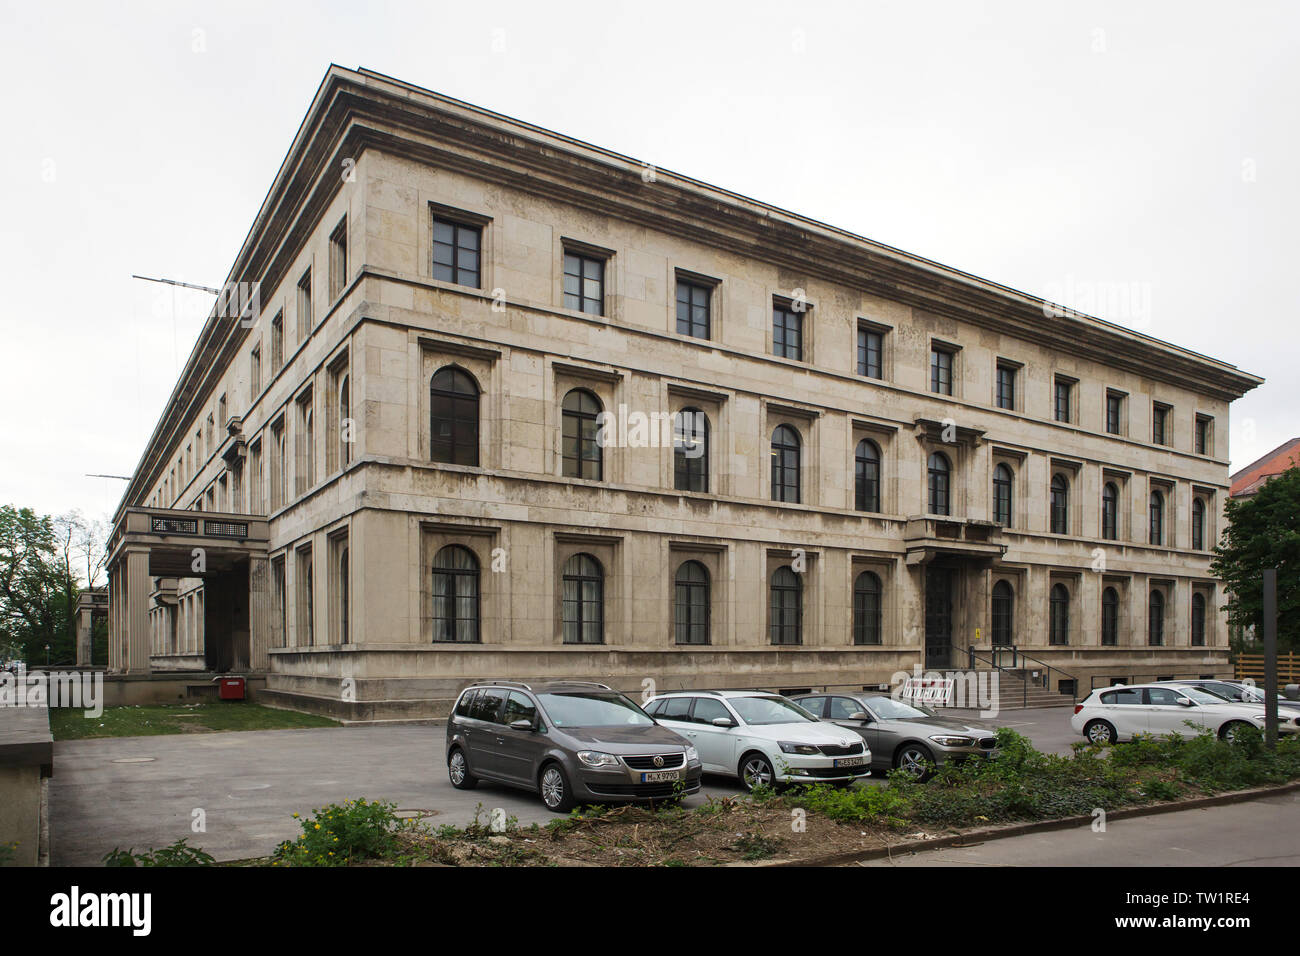 Former administration building of the National Socialist German Workers' Party (Verwaltungsbau der NSDAP) designed by German architect Paul Ludwig Troost and built in 1933-1937, now the House of Cultural Institutions (Haus der Kulturinstitute) in Munich, Bavaria, Germany. Stock Photo